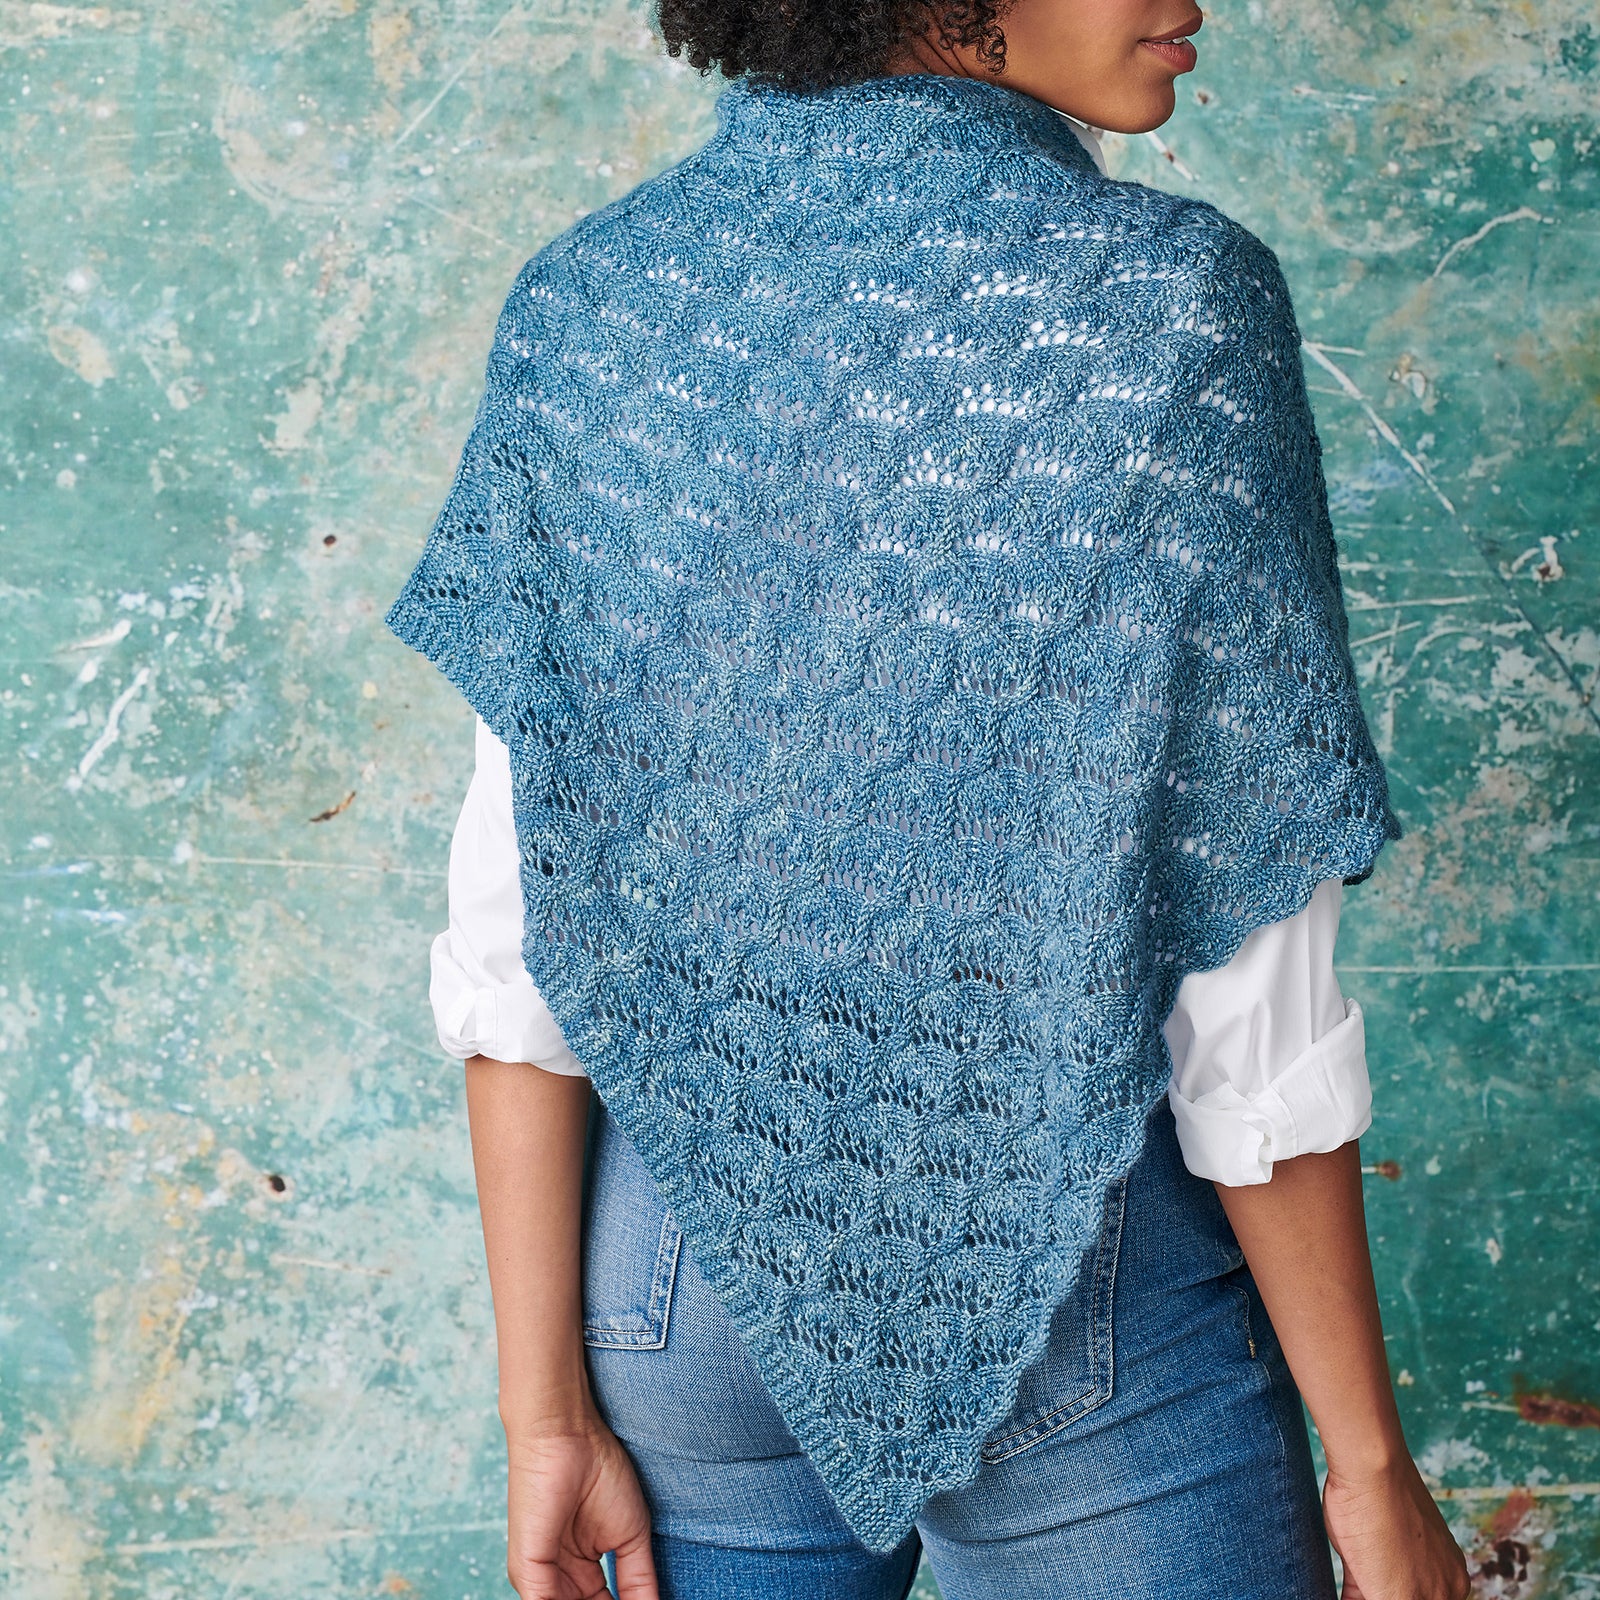 A blue triangular shawl with all over lace detailing